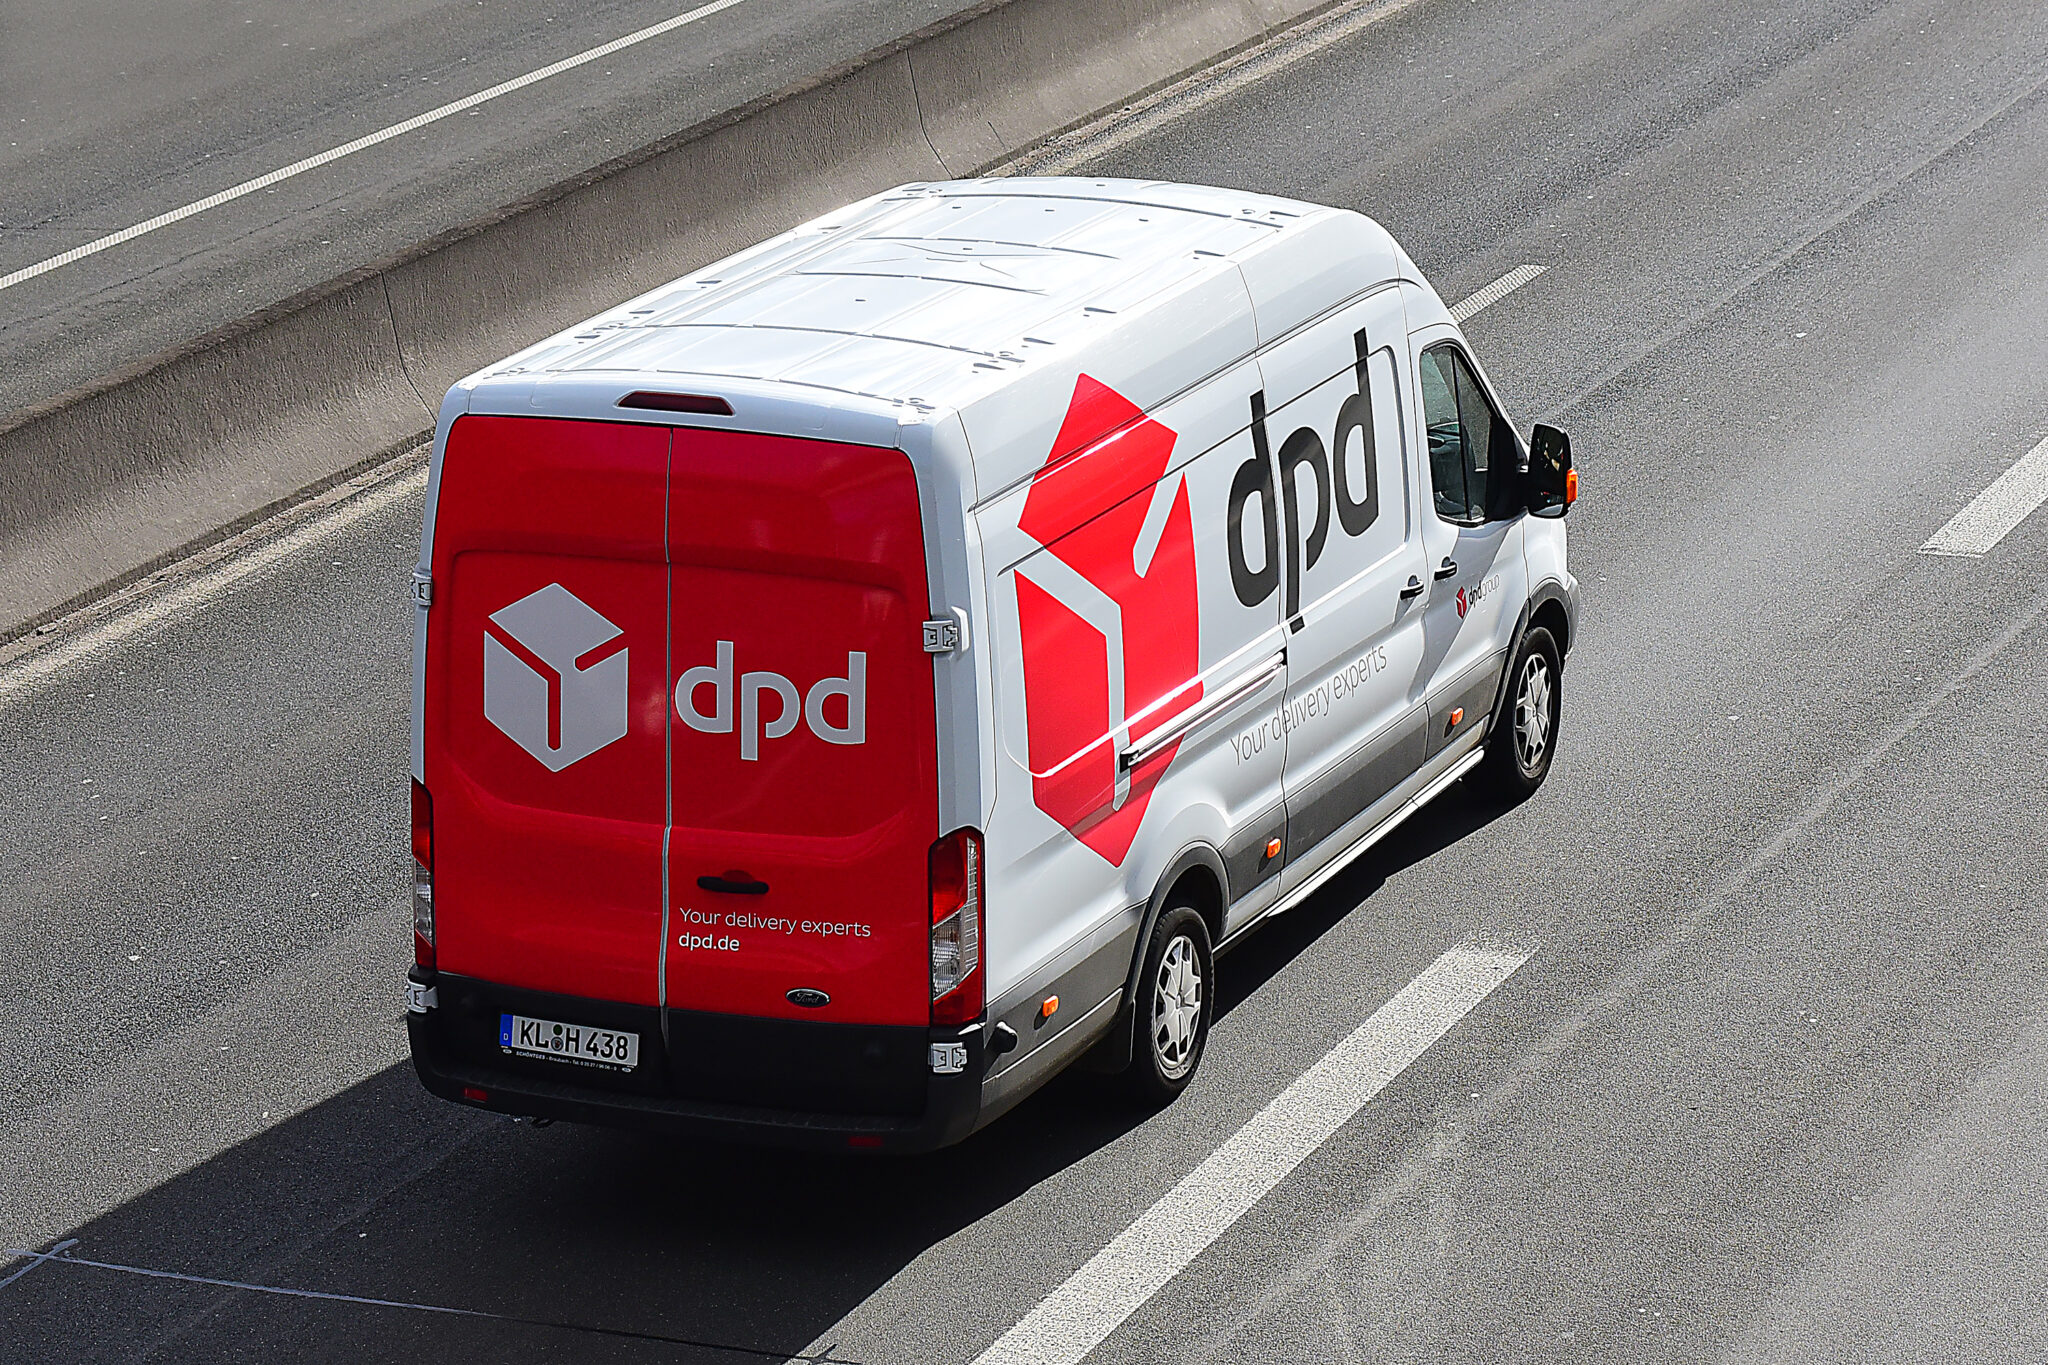 dpd-and-evri-delivery-delays-caused-by-royal-mail-strikes-deliveryx